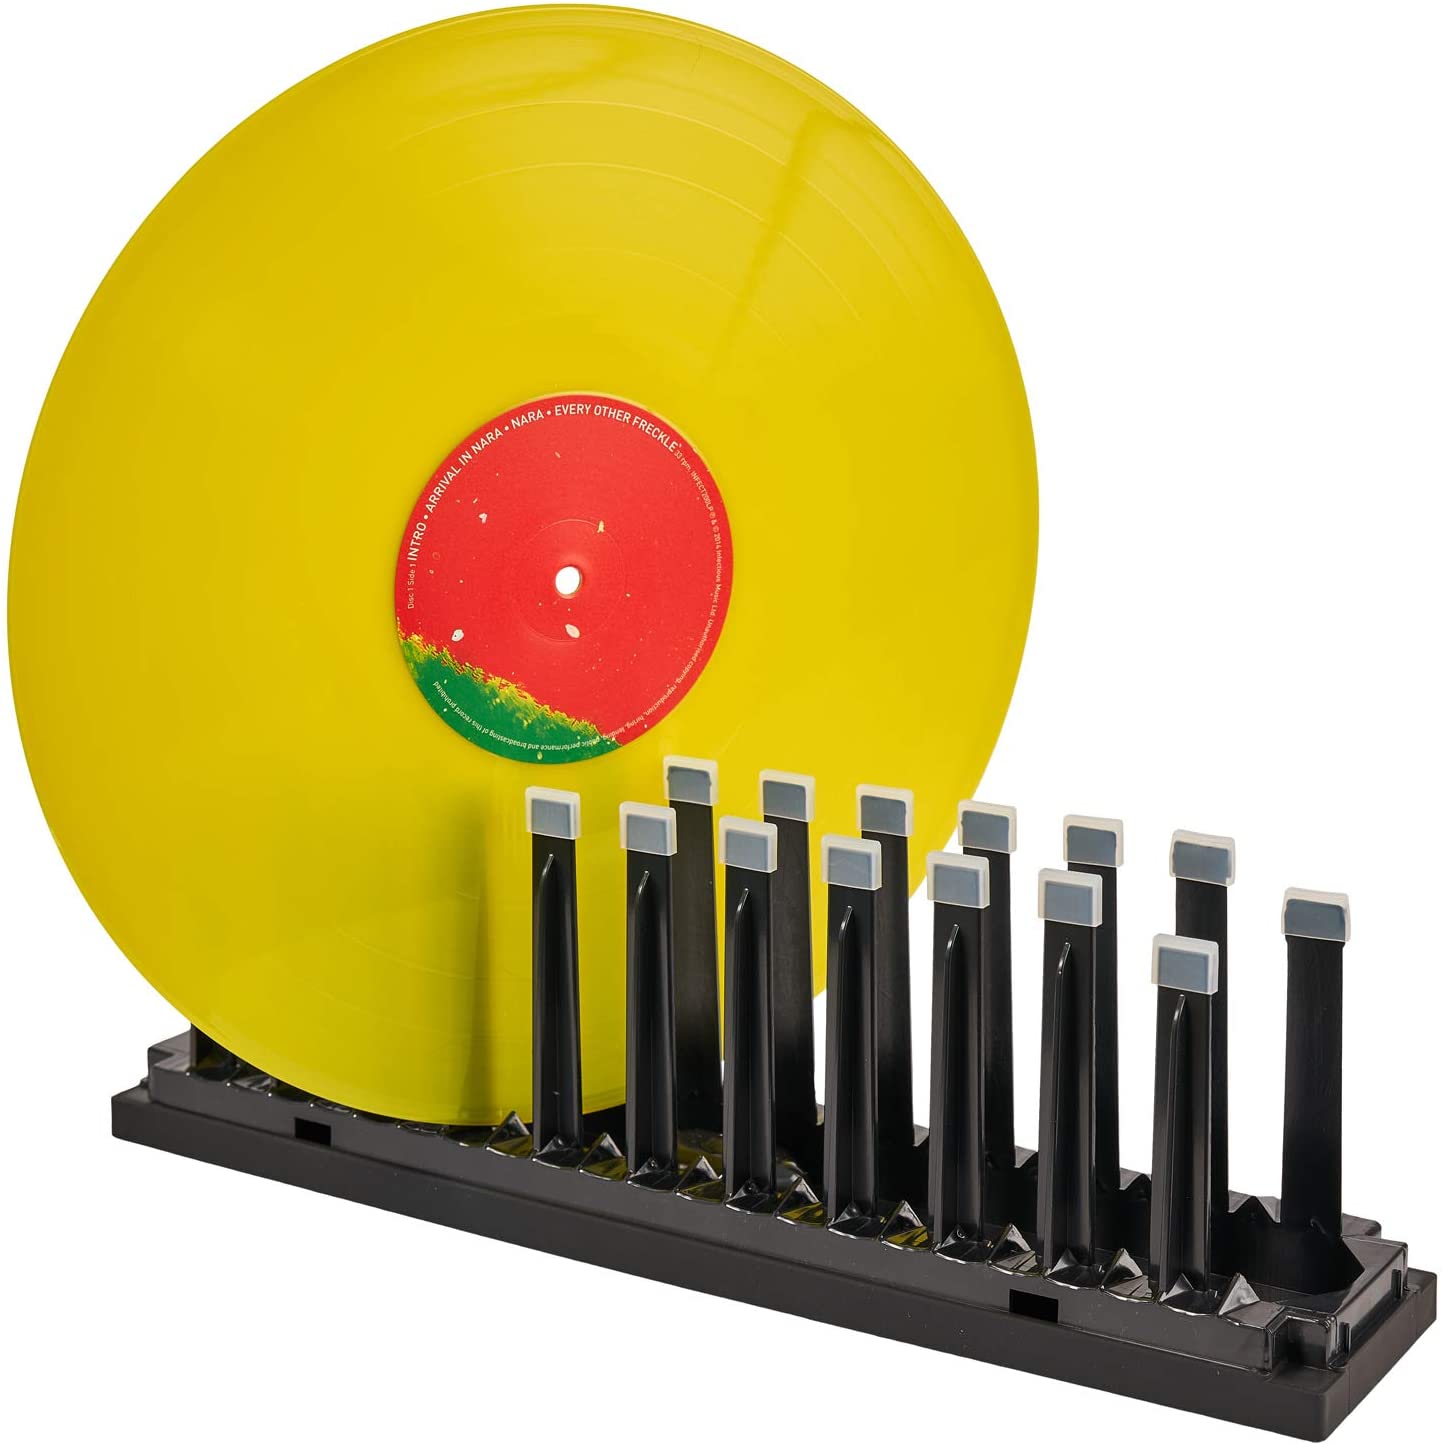 Spincare Record Cleaning Machine